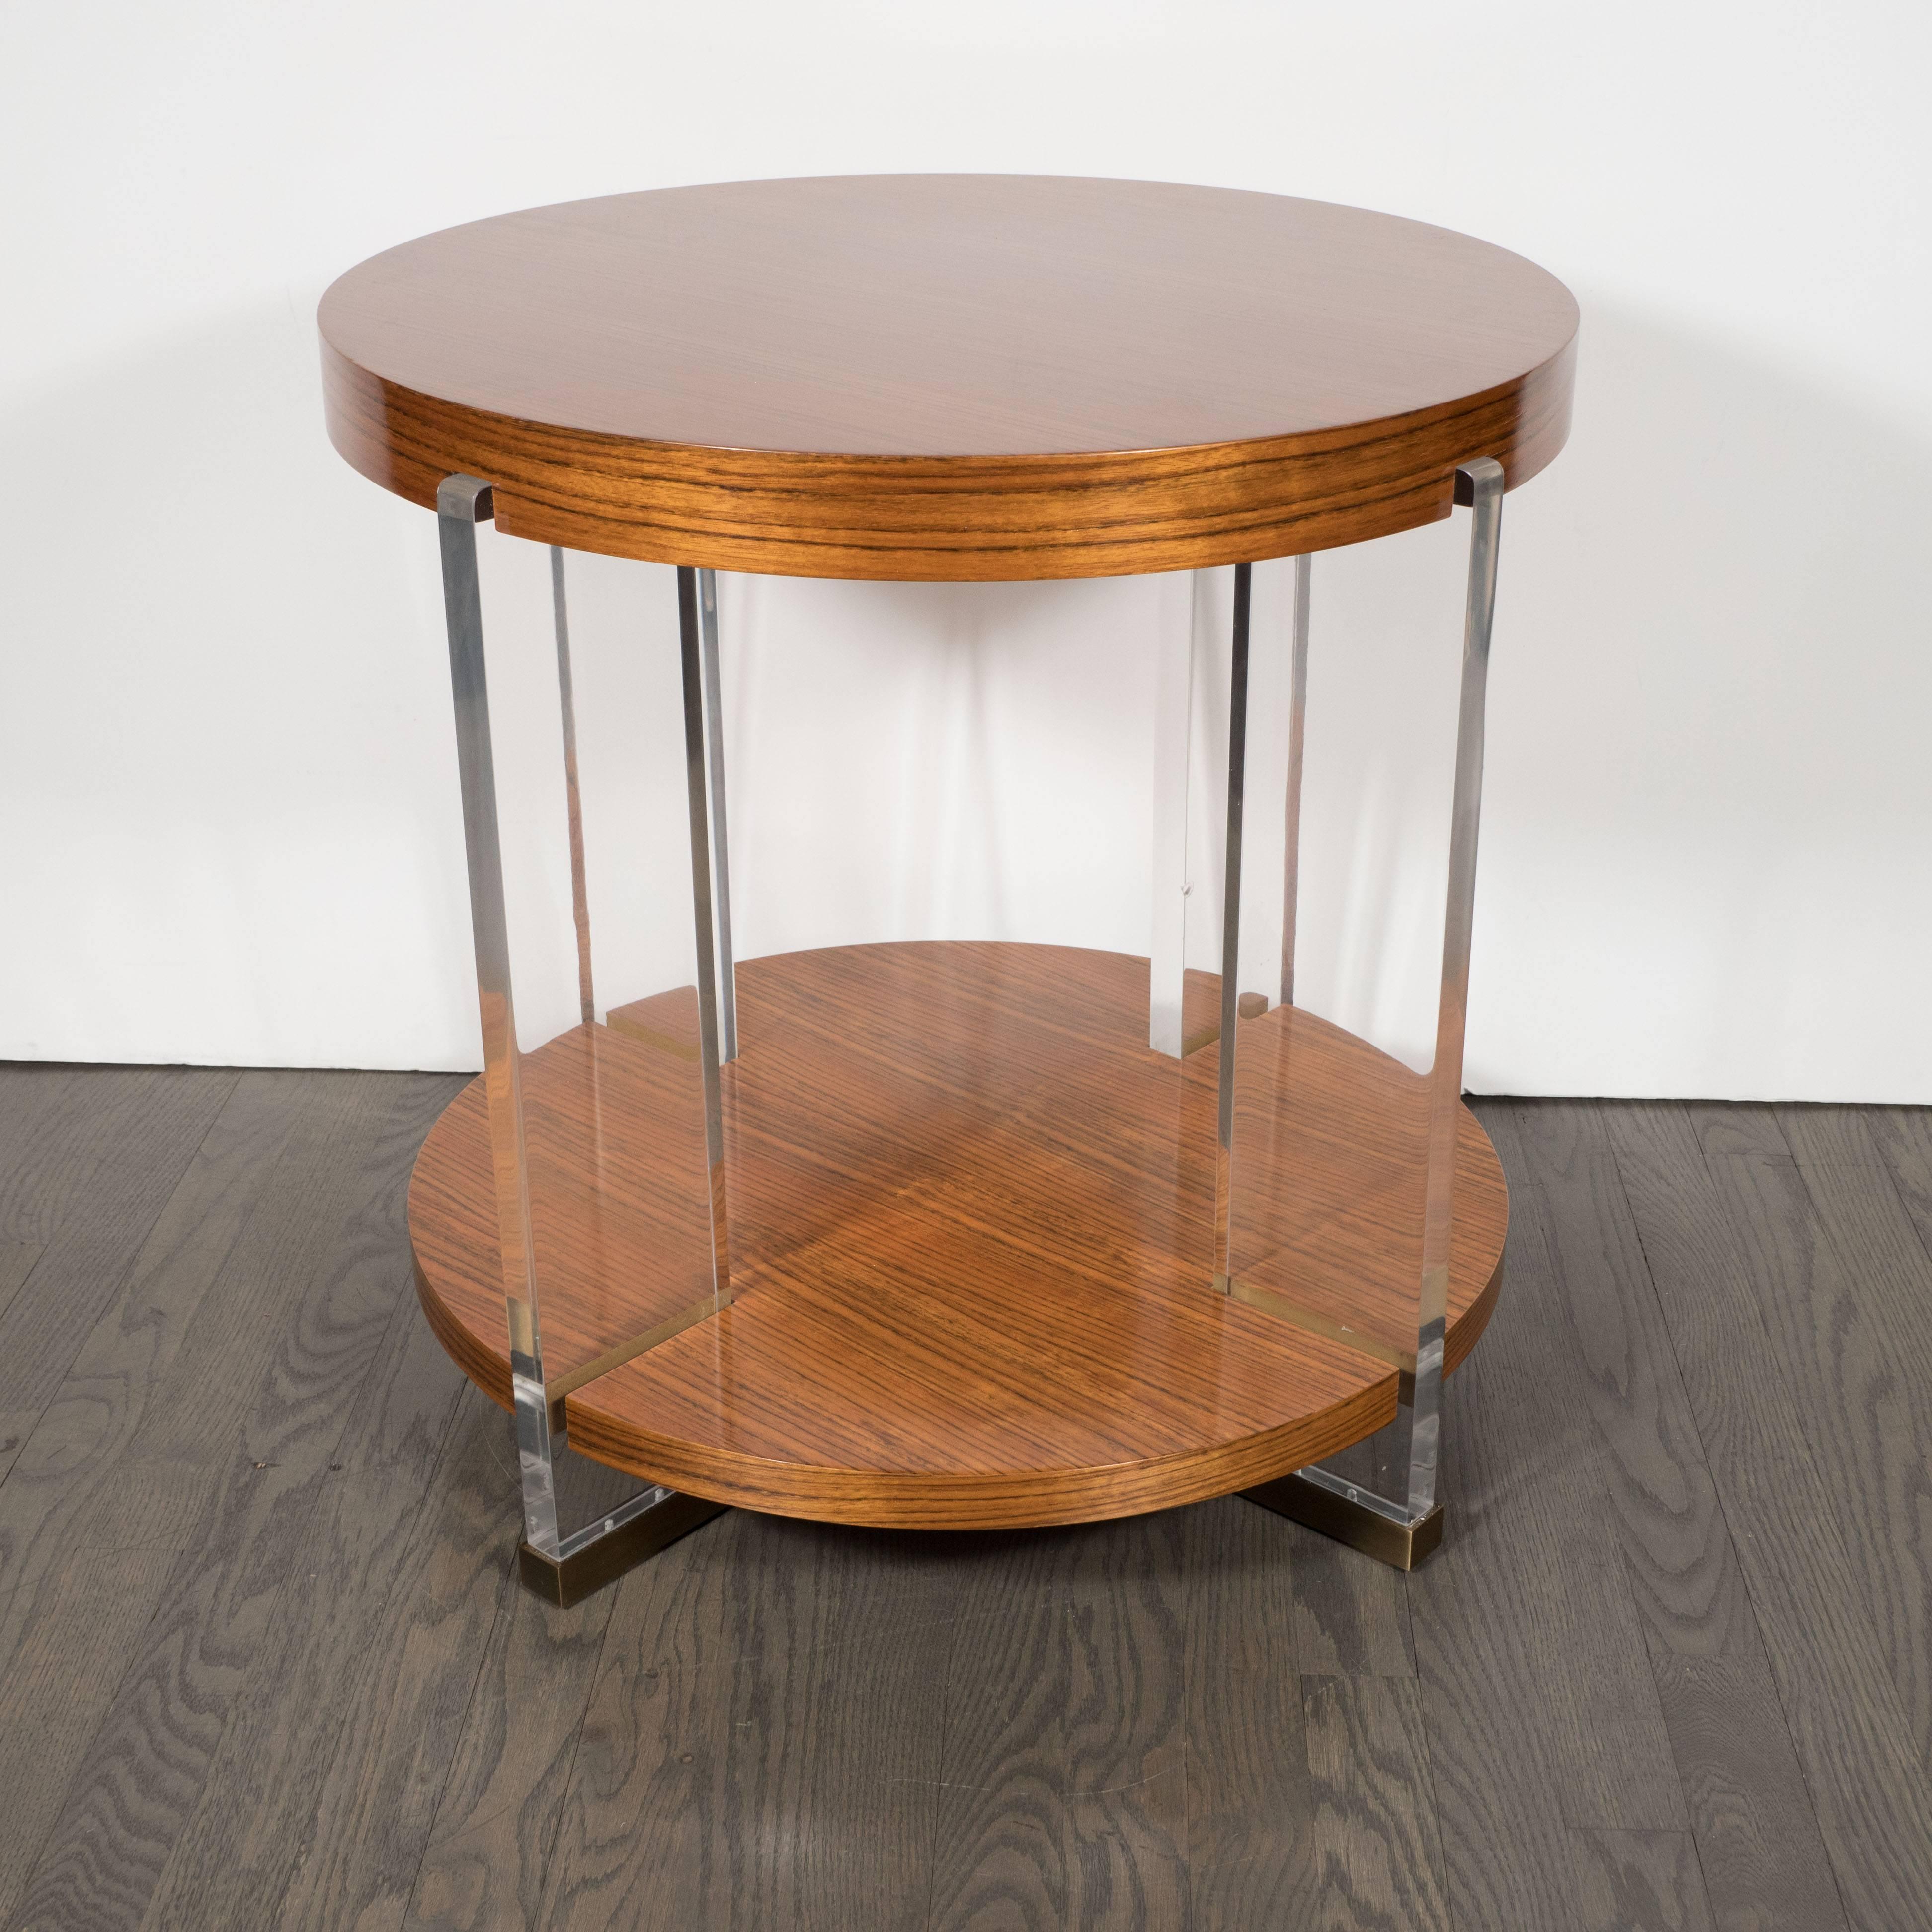 American Vanguard Circular Table in Bookmatched Mozambique with Lucite Supports